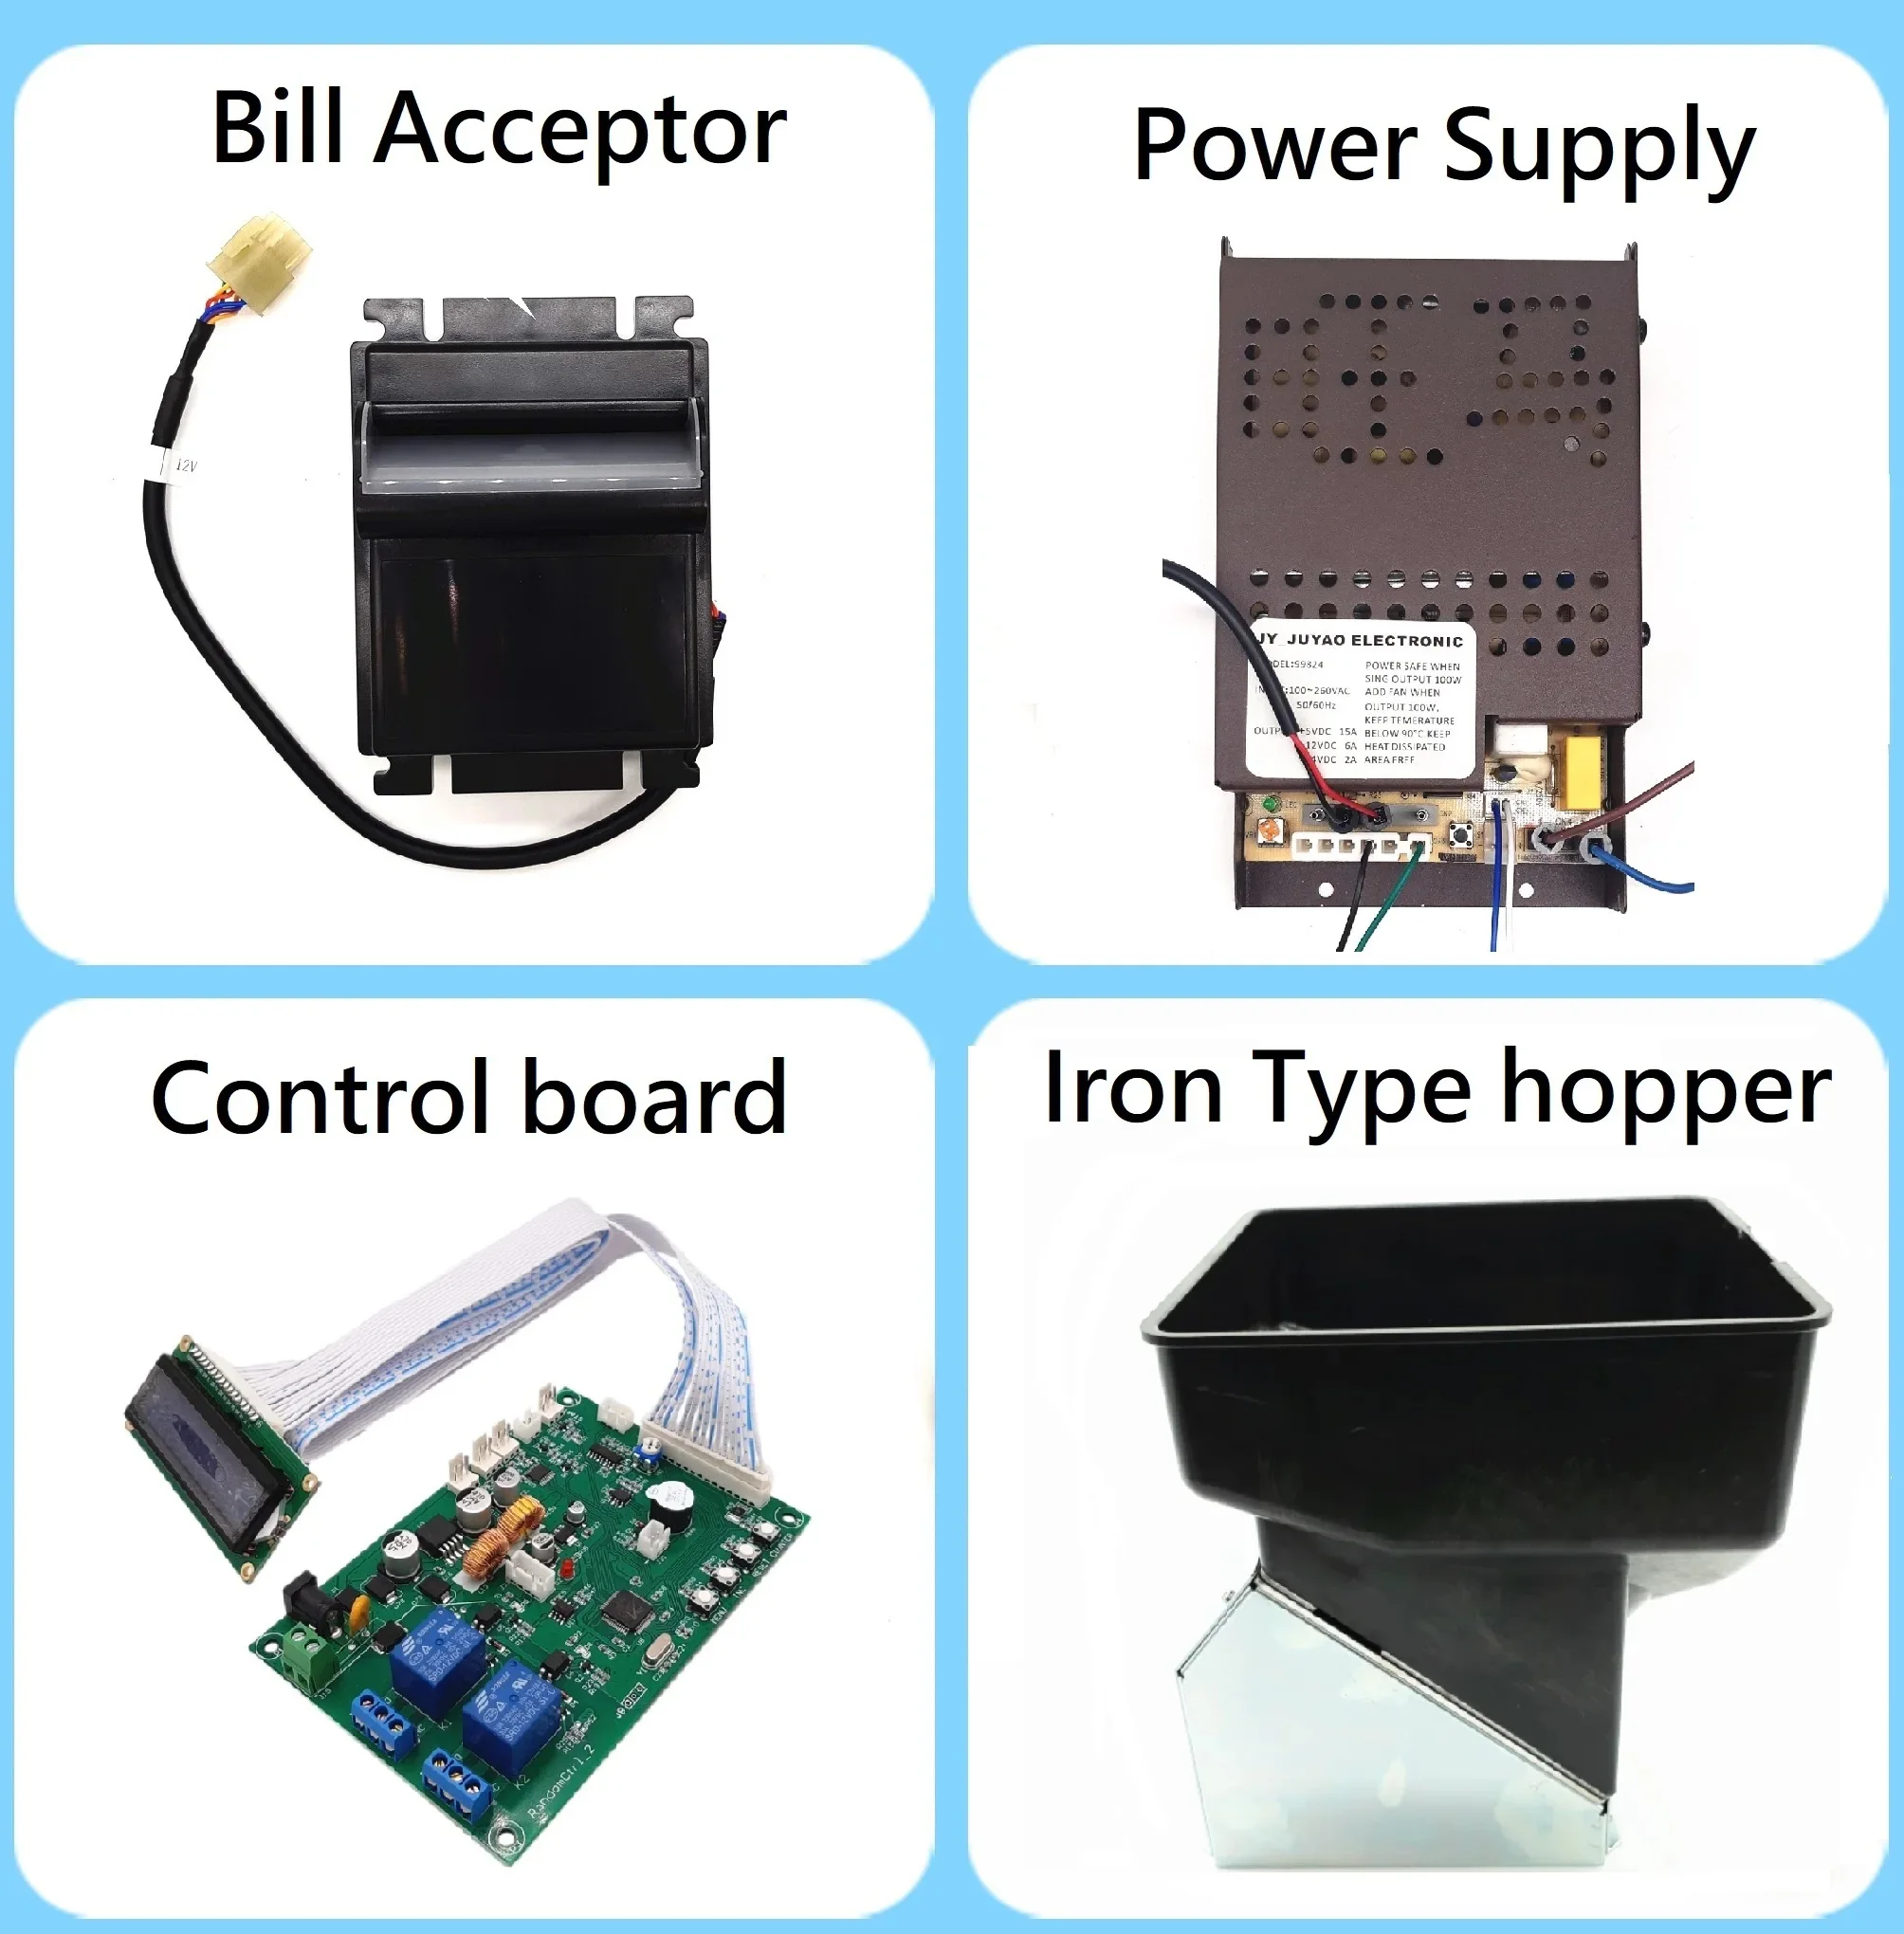 LCD Display Coin Changer Kit with JY-146 Control Board Bill Acceptor Power supply Coin Hopper for Bill Acceptor to Coin Token